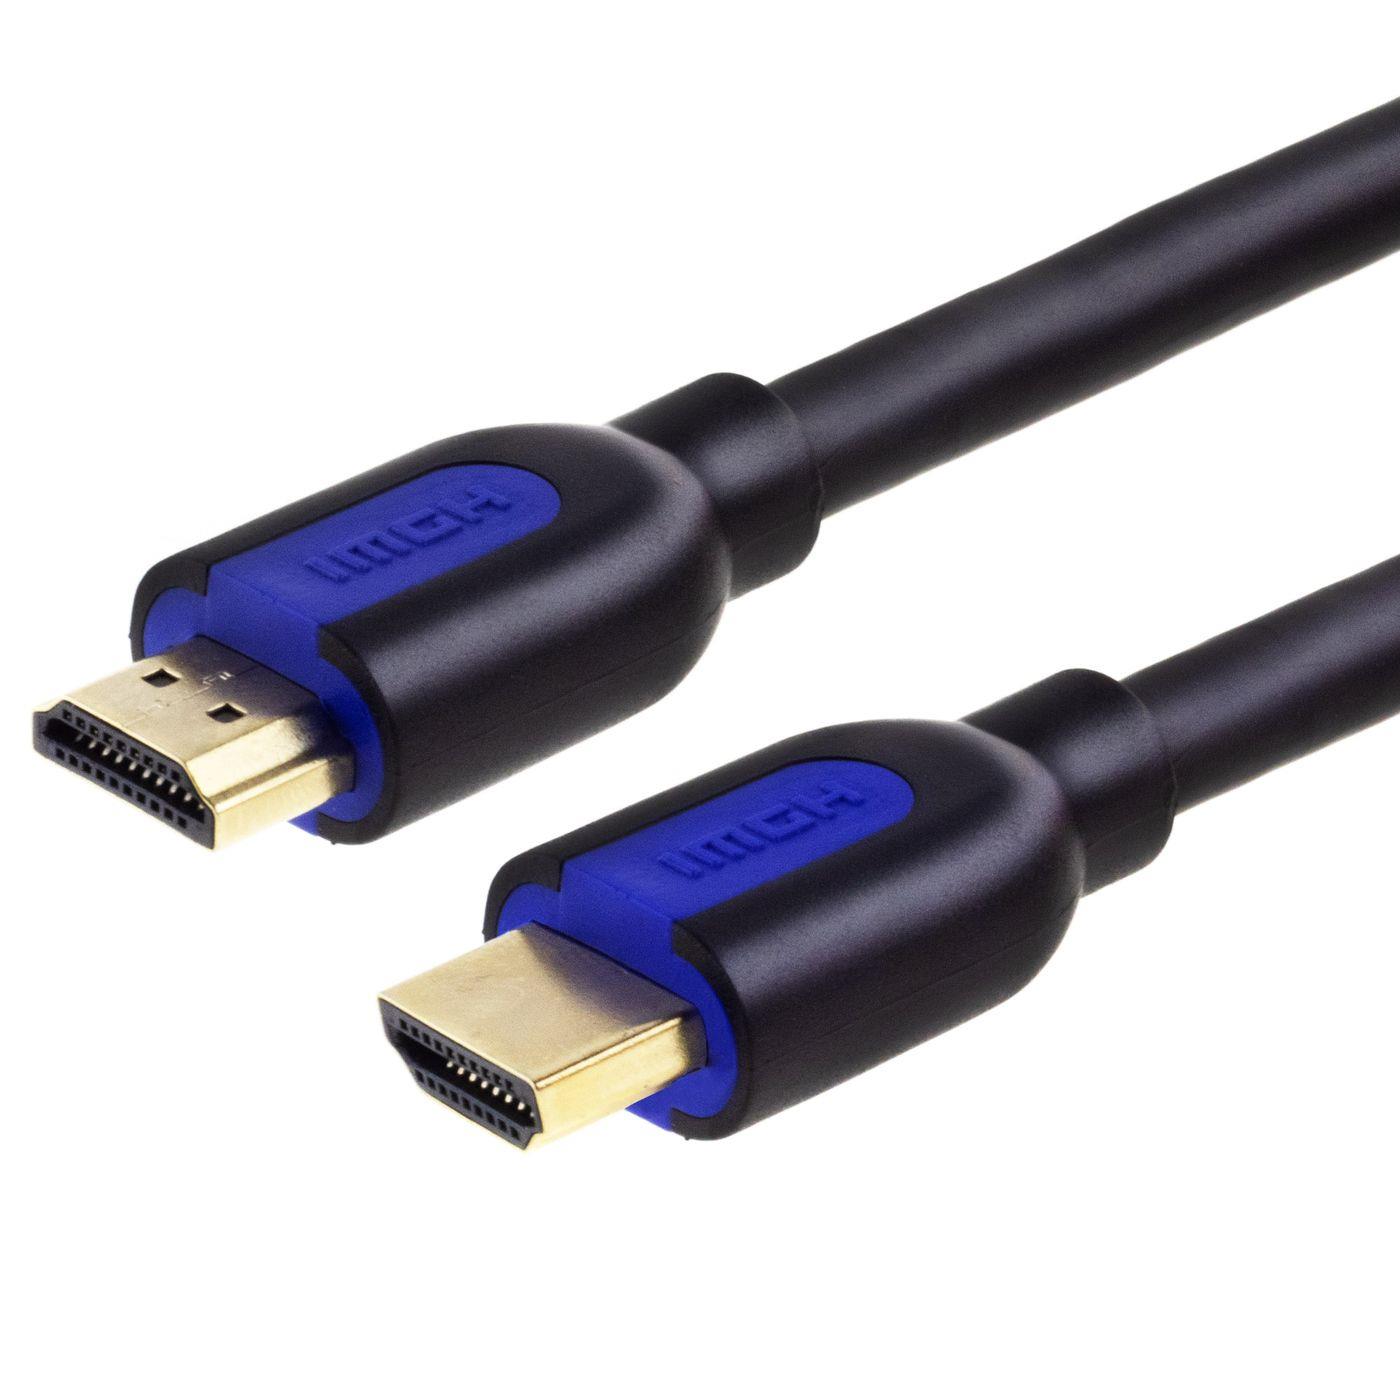 3m HDMI Cable HDMI 2.1 Cable 8k @ 60Hz - 4k @ 120Hz 48GBit/s High Speed UHD